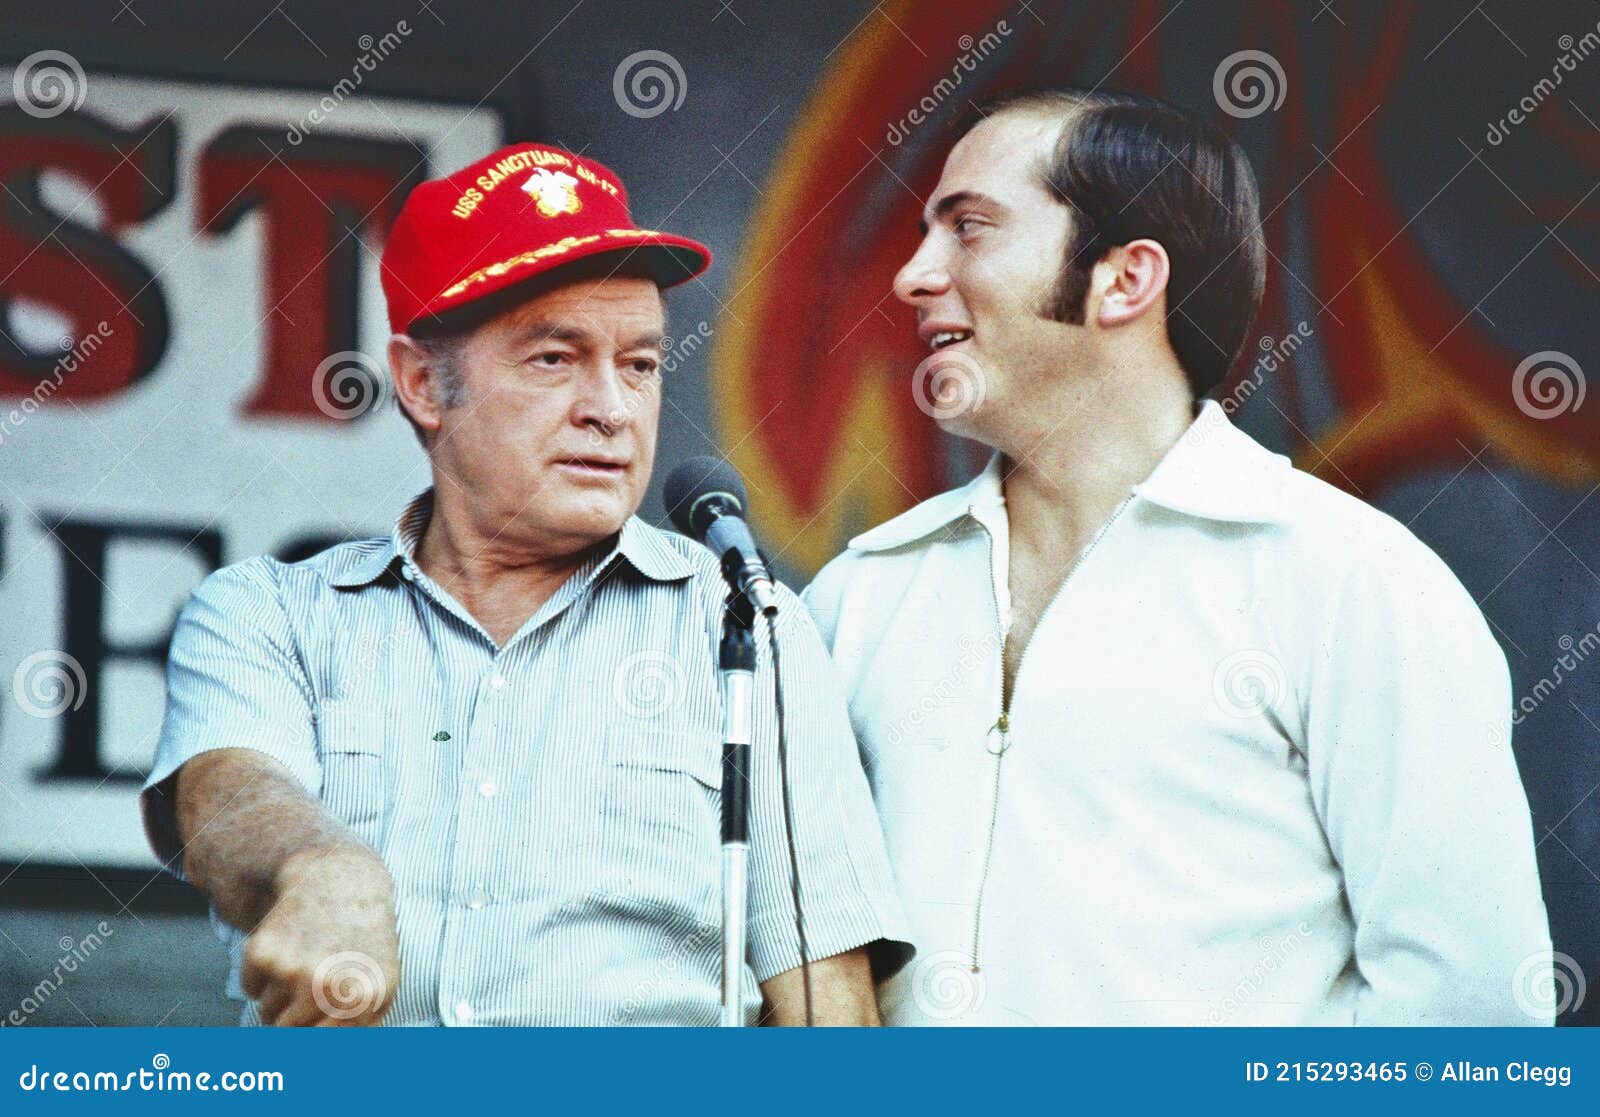 Bob Hope and Baseball Player Johnny Bench in Viet Nam Editorial Image -  Image of special, show: 215293465